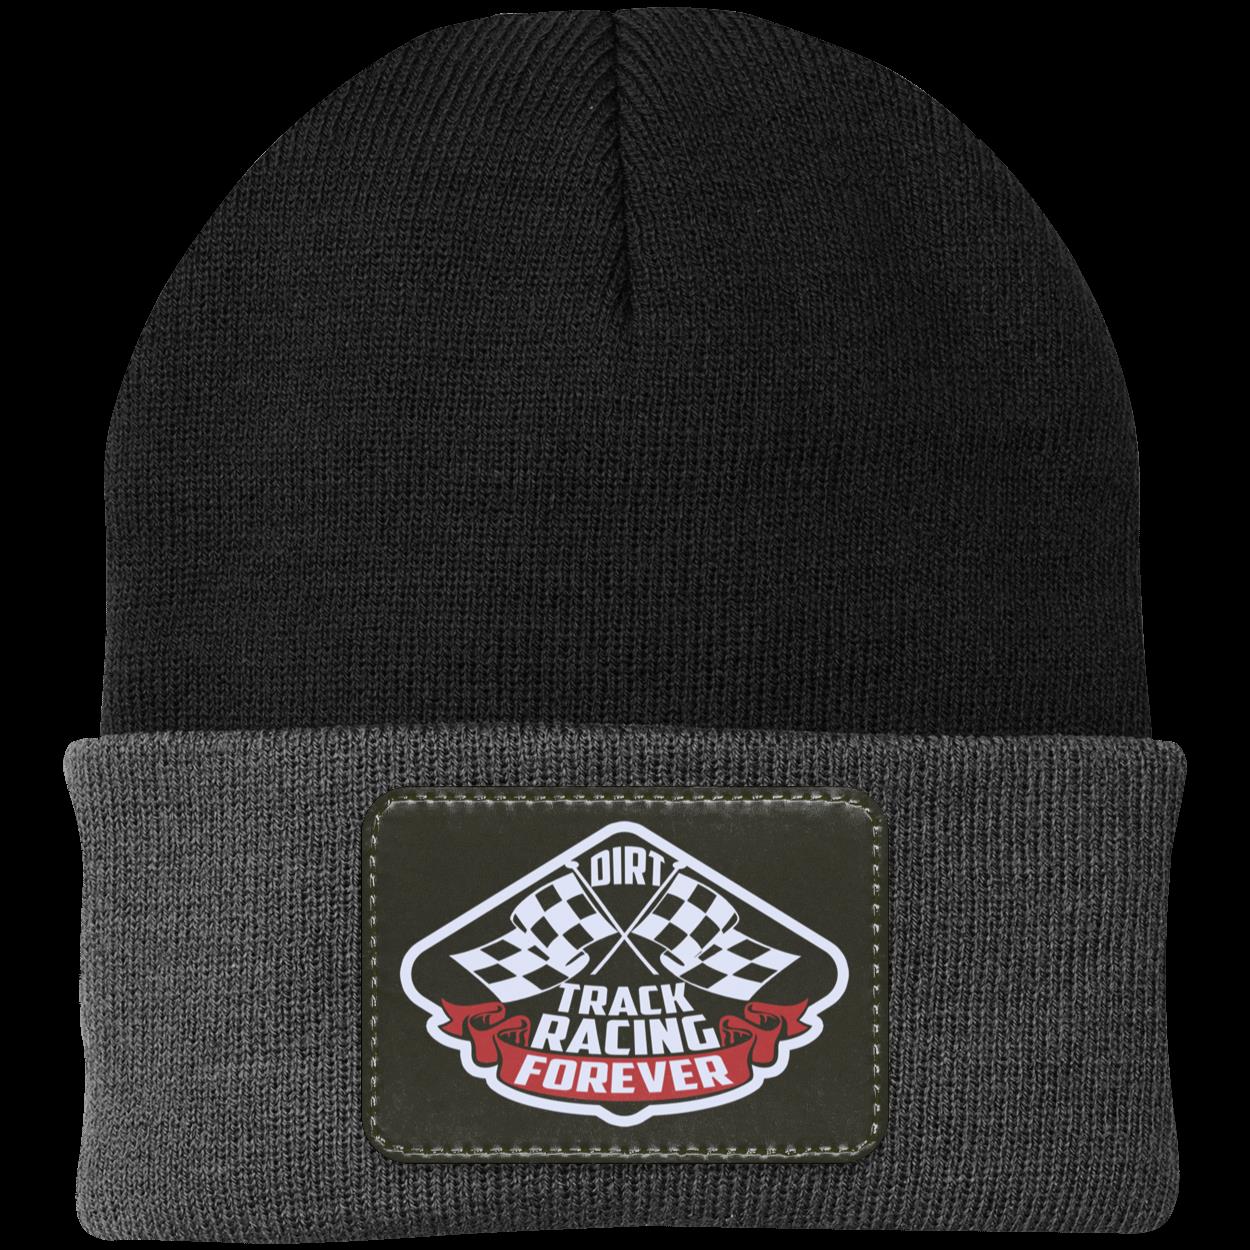 Dirt Track Racing Forever Patched Knit Cap V3